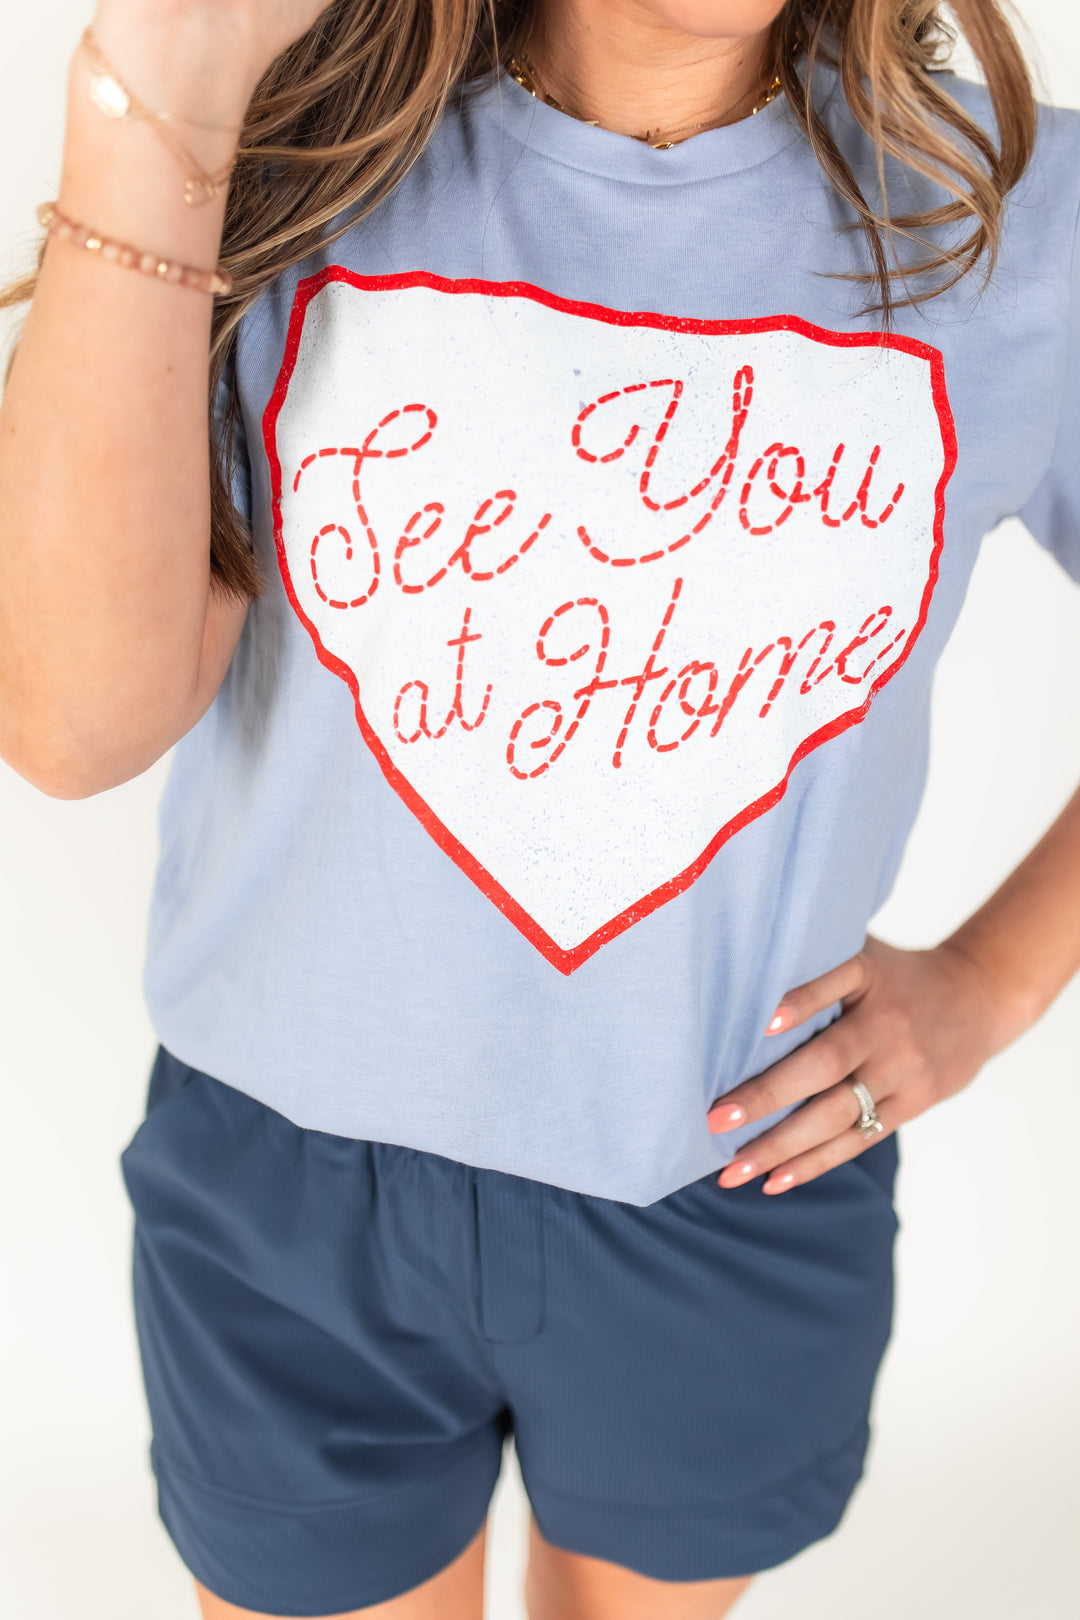 The 'See You at Home' Tee